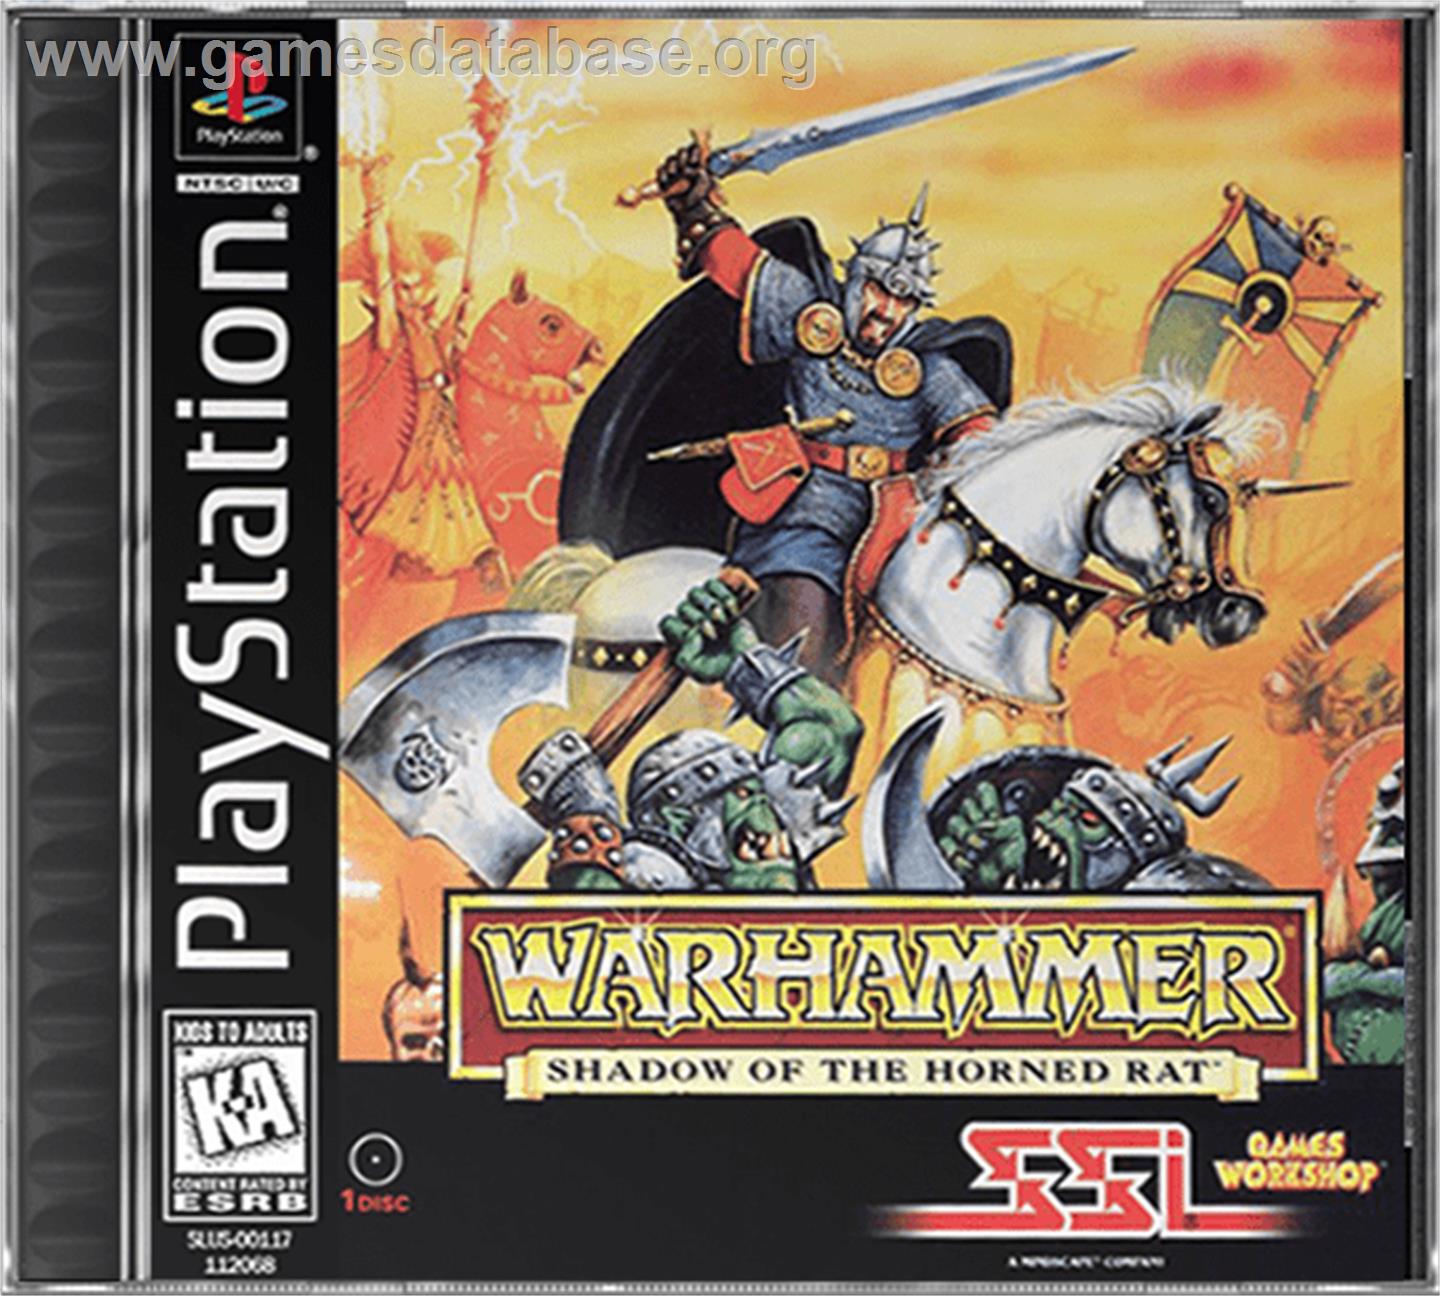 Warhammer: Shadow of the Horned Rat - Sony Playstation - Artwork - Box